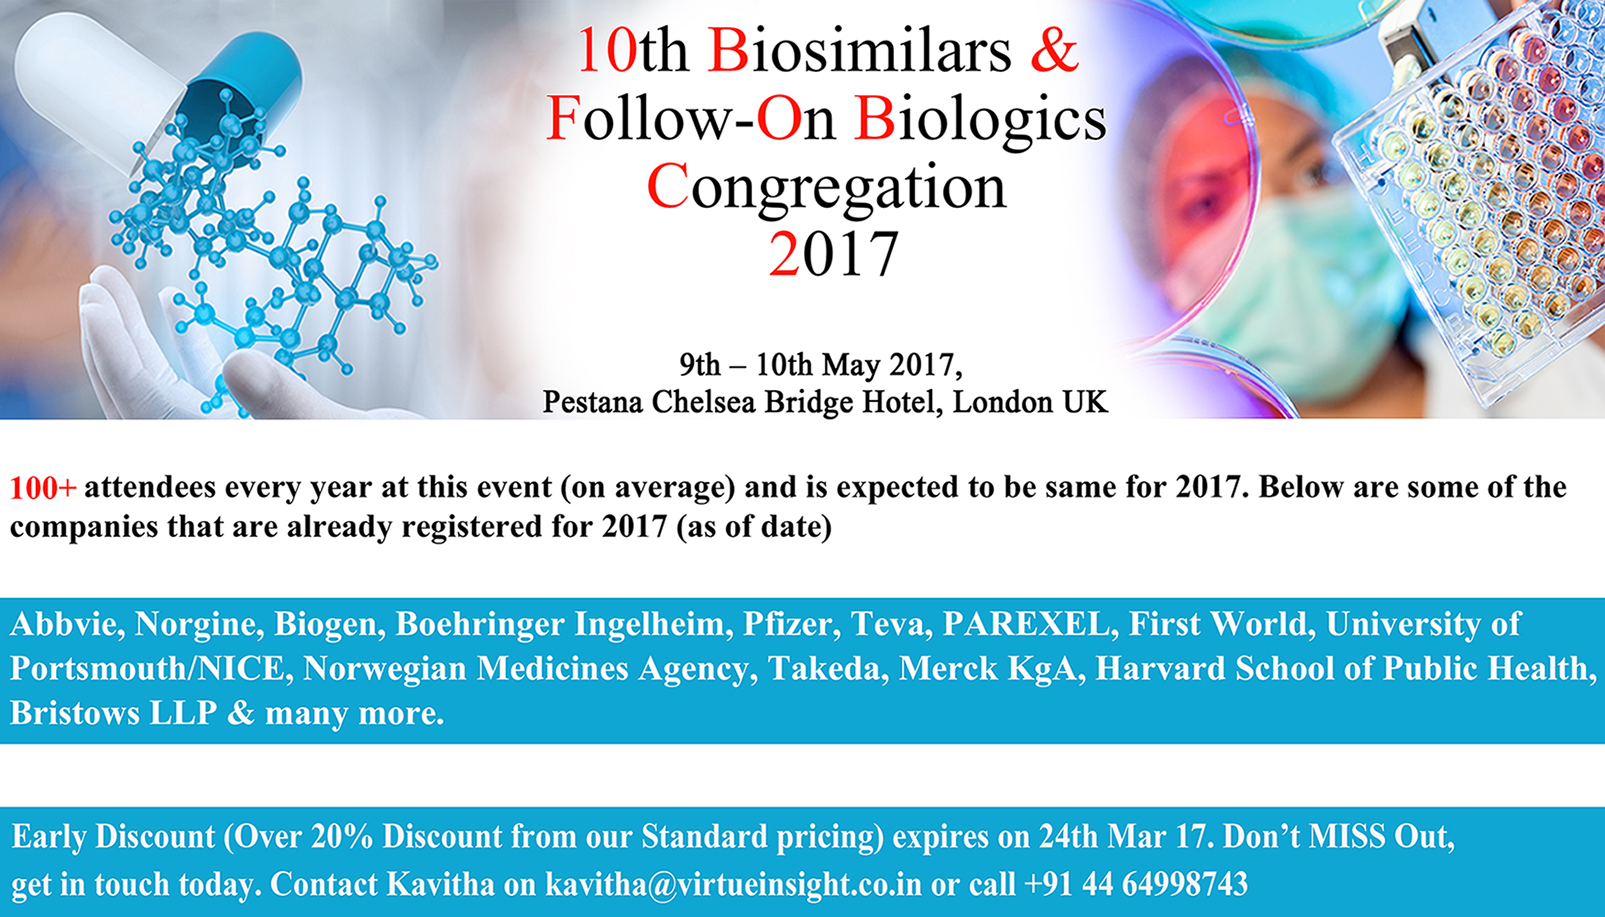 Brings together top pharmaceutical, biotechnology and regulatory representatives under one roof that will address the key issues of the industry.
It will look at the multiple facets of Biosimilars, ranging from the evolving regulatory landscape and challenges in clinical development, to the legal and economic aspects. 
This conference will focus on multiple aspects of Biosimilar product development to successfully deliver safe, Biosimilar products to the market place. 